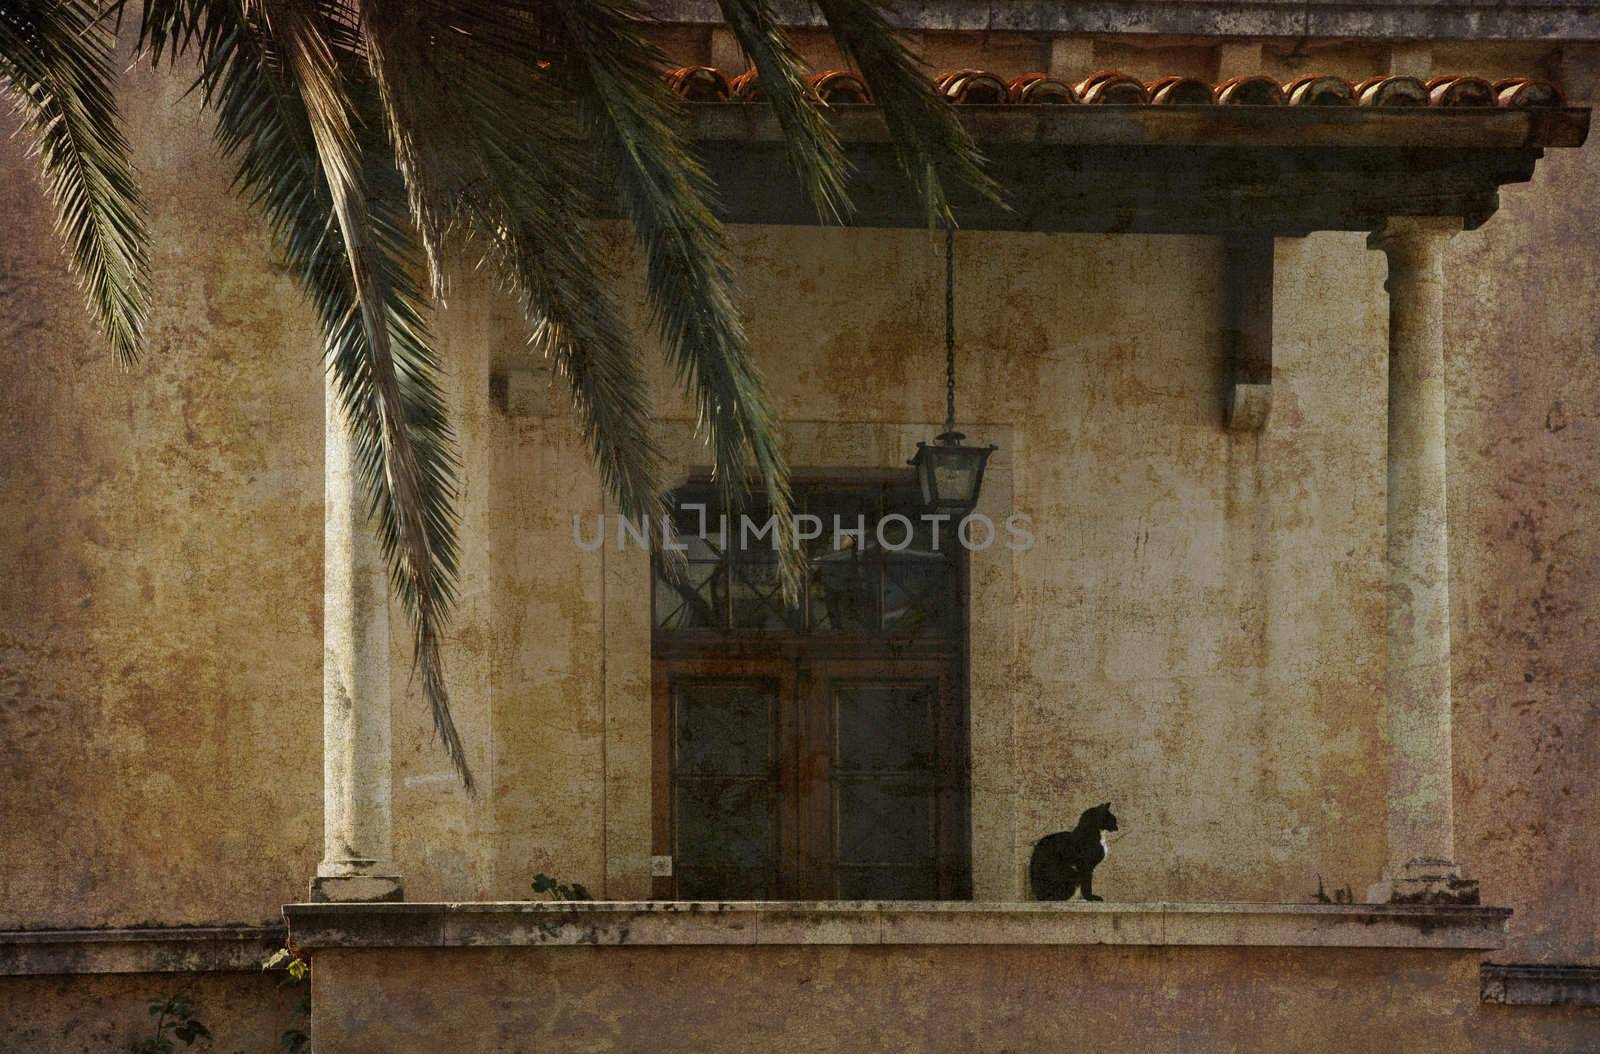 Entrance with cat - postcard from Dubrovnik, Croatia. Several of my photos worked together to reflect age and time.